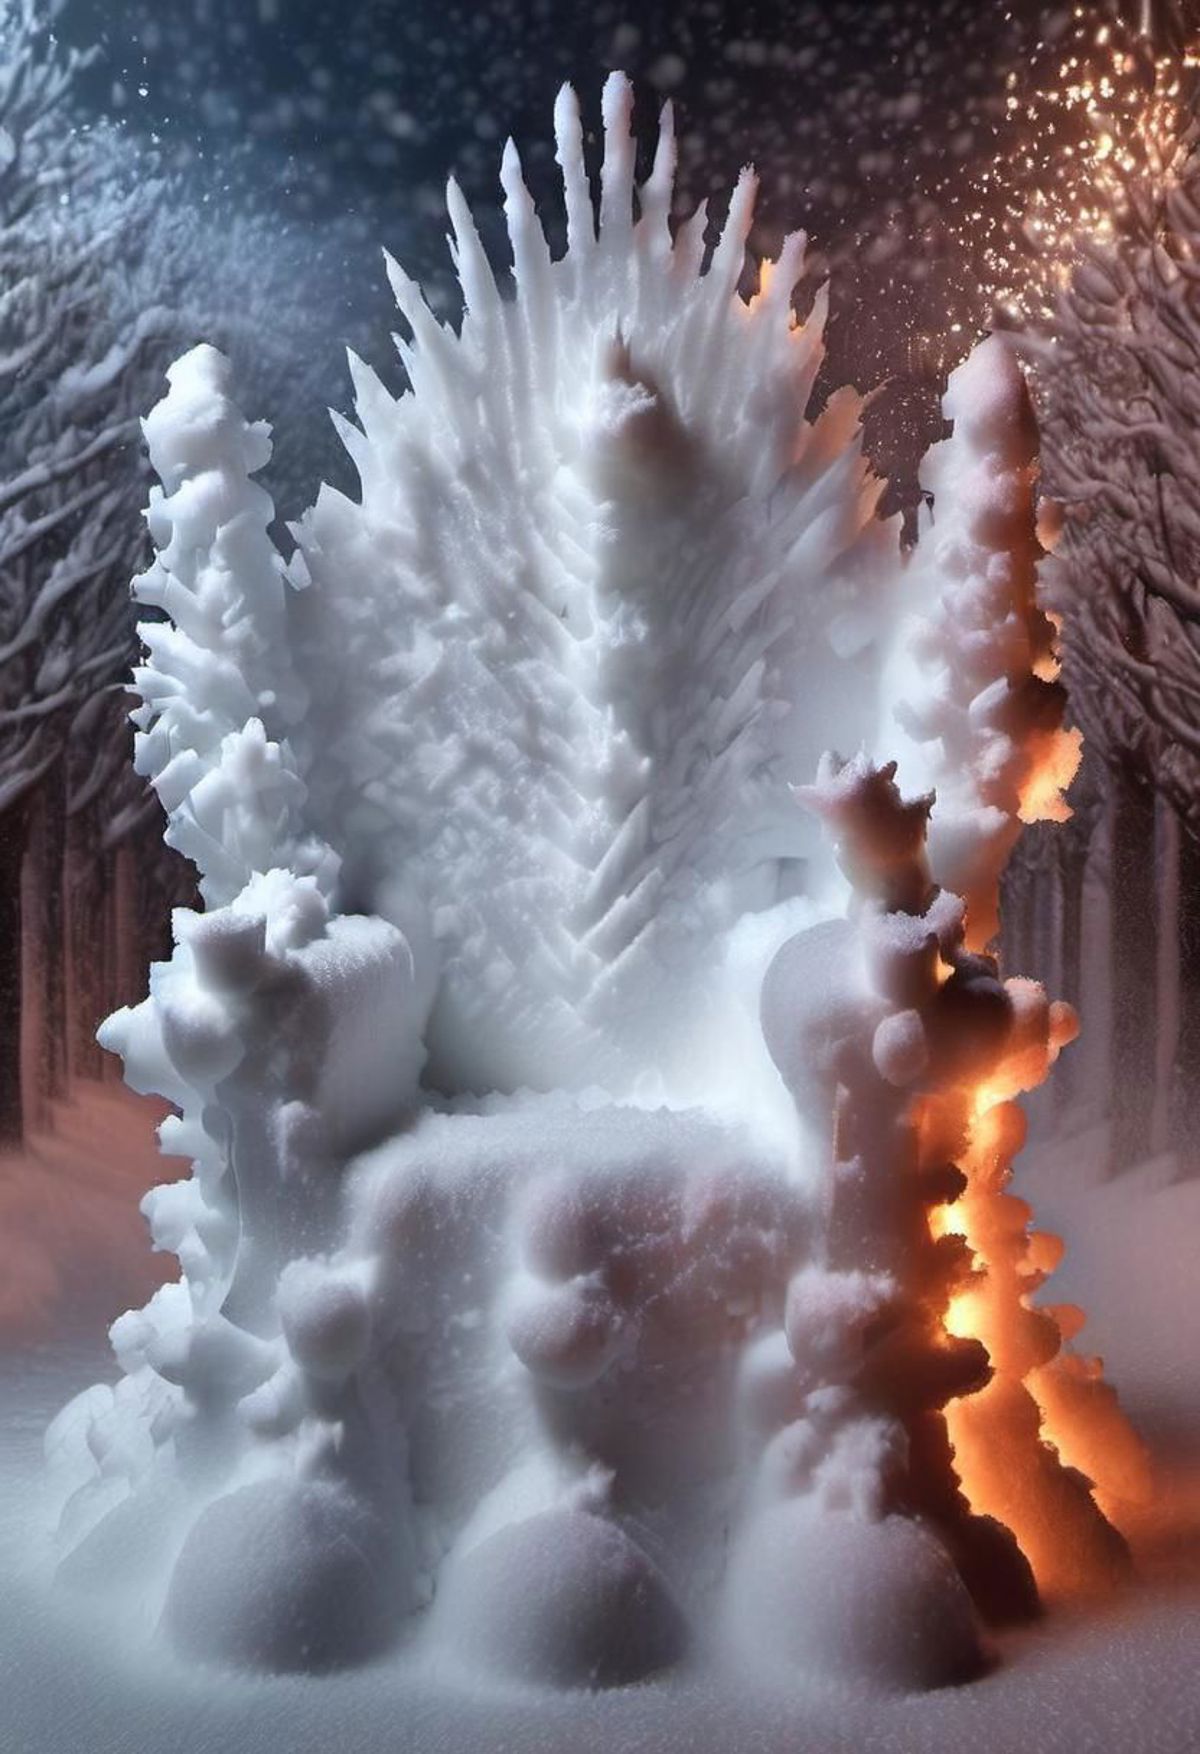 A chair covered in snow with a tree in the background.